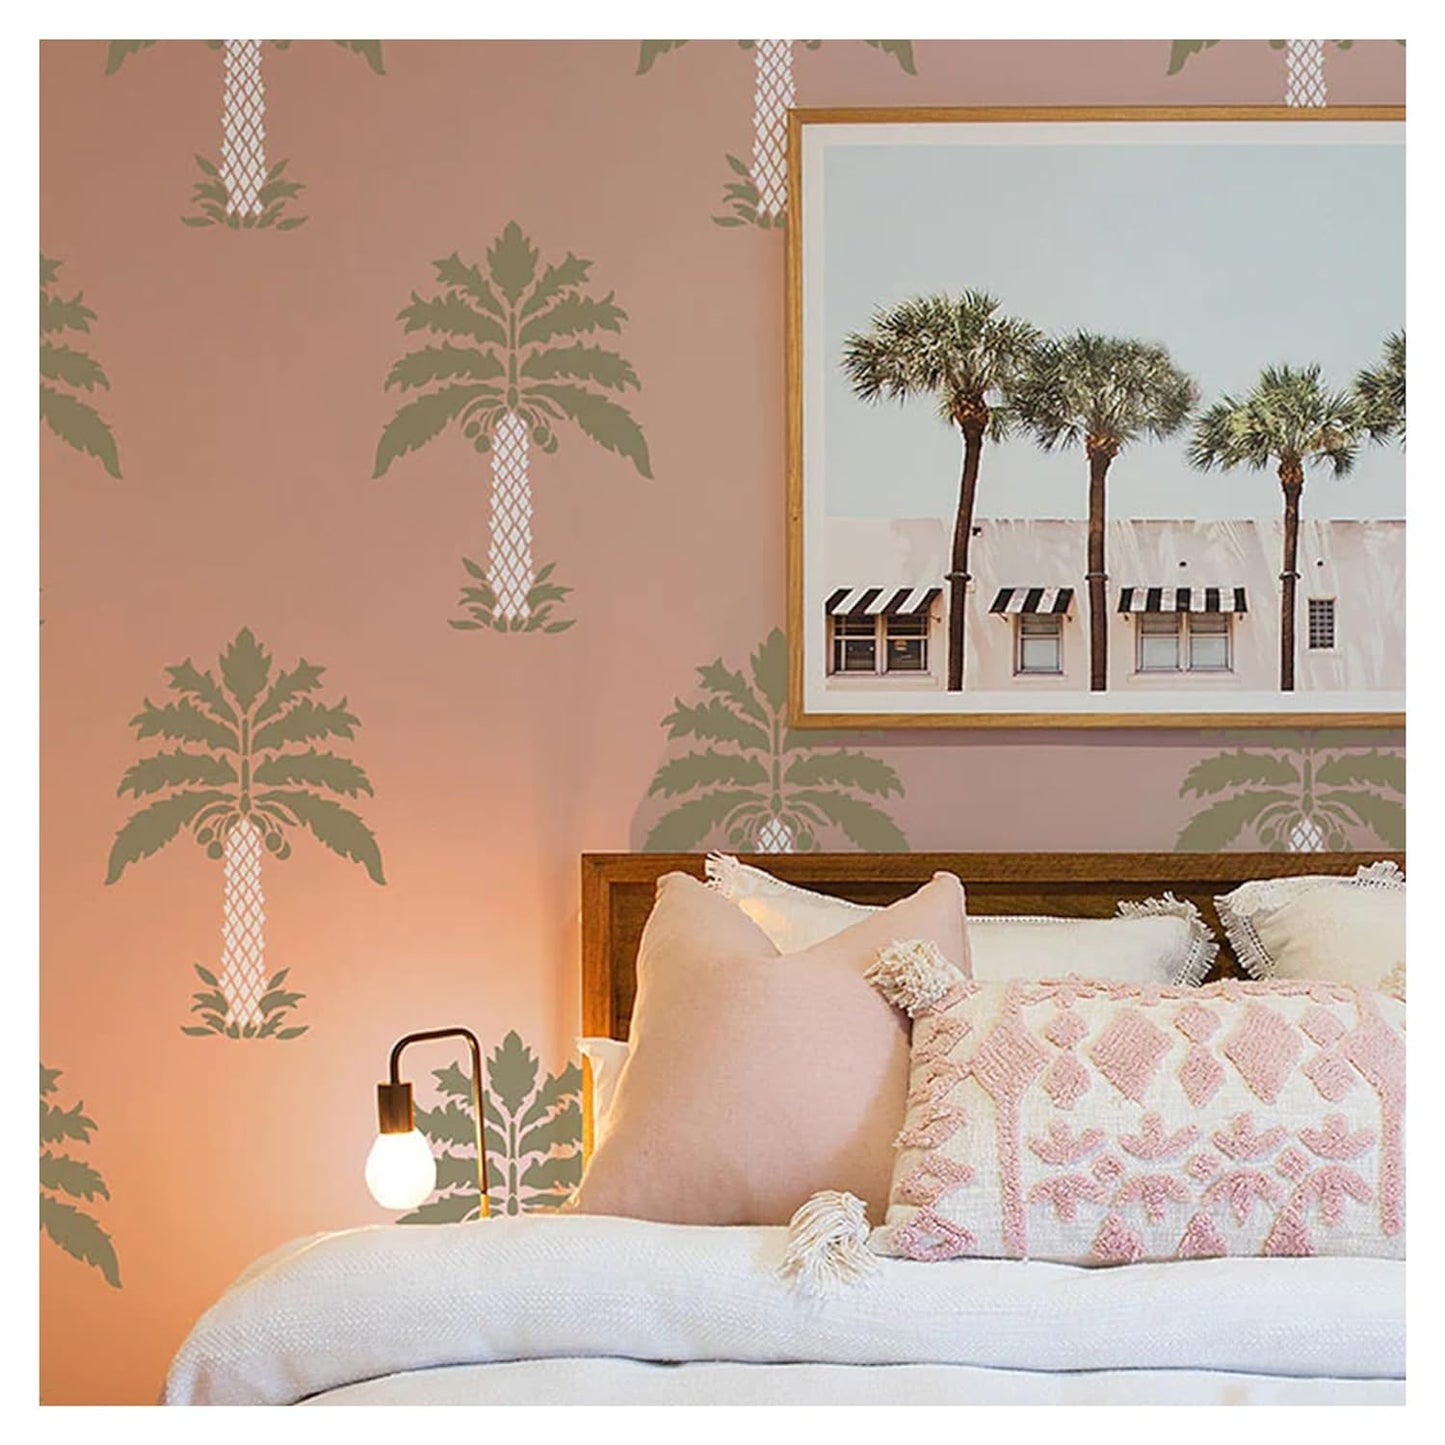 Latest Palm Tree Wall Stencils for Wall Painting - Pack of 1, Sheet Size 24 x 36 inch/Design for Wall Painting 21 x 33 inch - Large